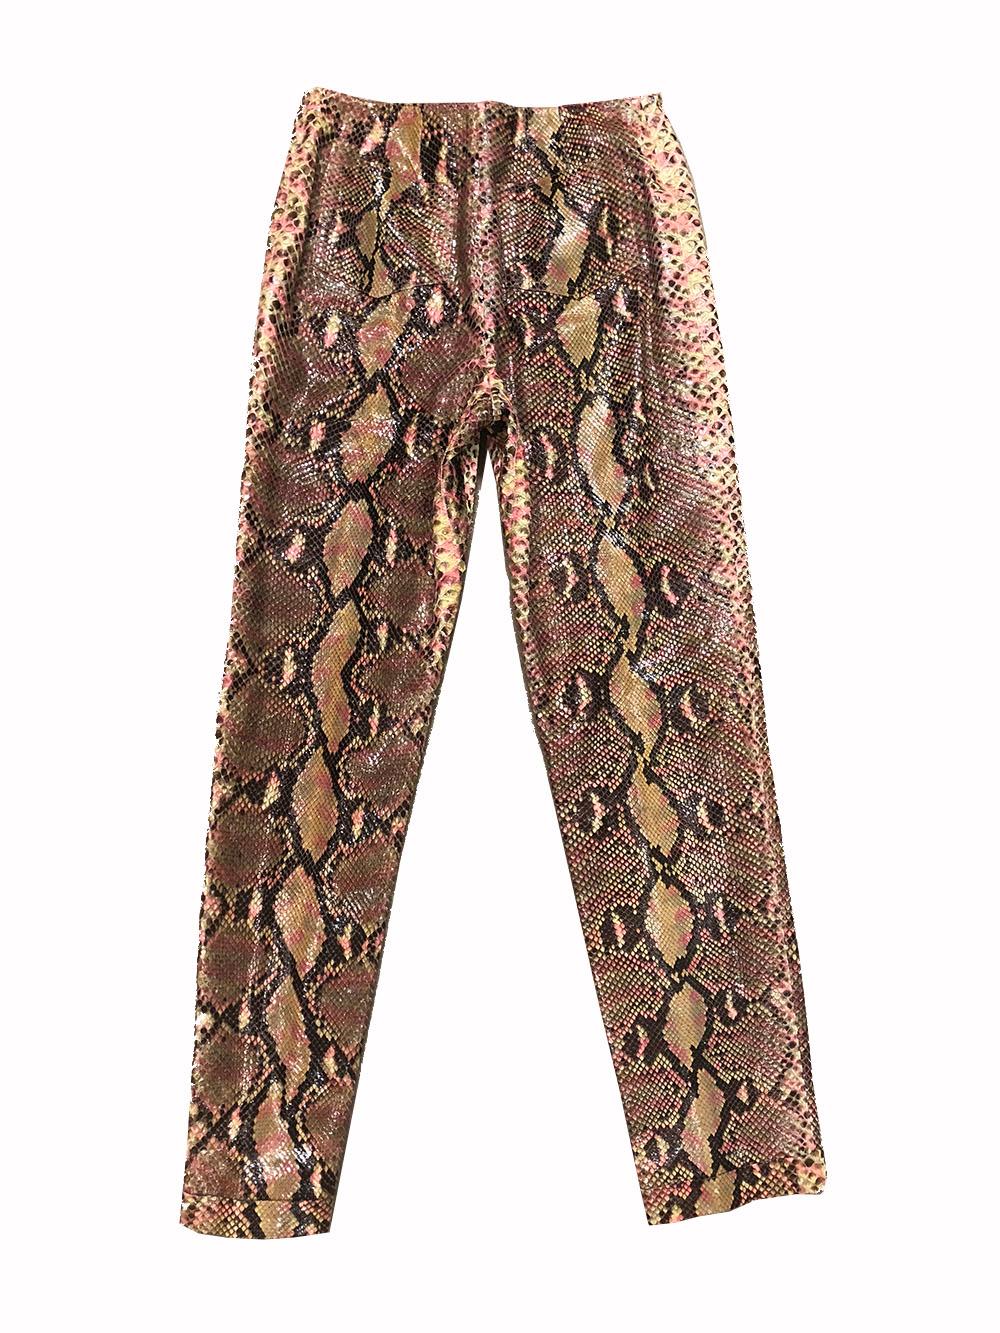 Multicolor Chanel Python Snakeskin pants. Black waist zippers on the front side. These are show-stoppers! 
Size 40. In pristine condition. 
Spring/summer 2000 collection 